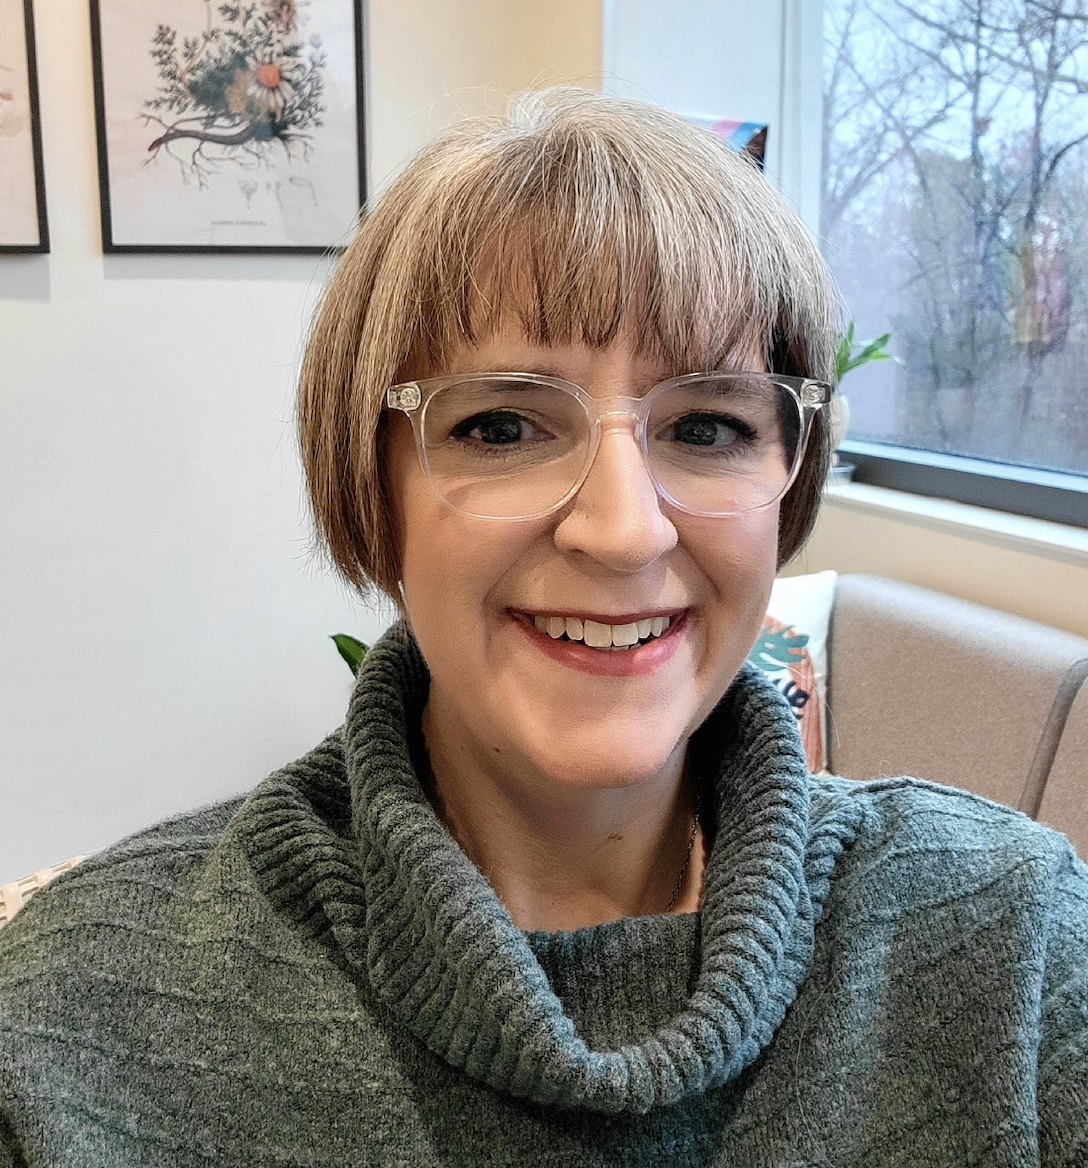 Photo of Amy Johndro–smiling white woman with short, light-colored hair wearing clear glasses and a grey-green cowl sweater